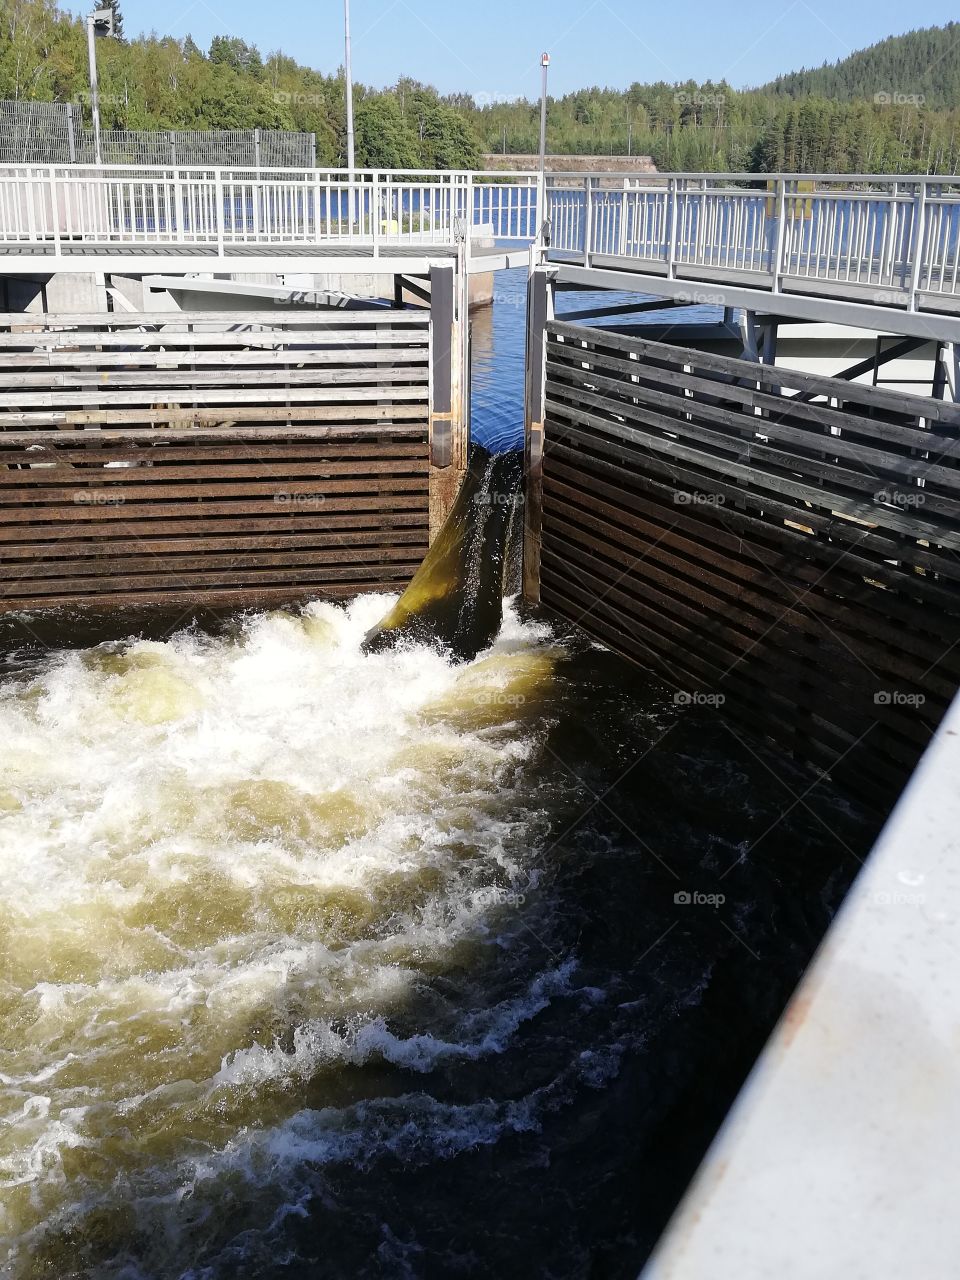 A waterway enclosed by gates, used for raising and lowering boats between levels, is open to let the water rush bubbling strongly. A metallic footbridge is empty and divides in two for a moment.